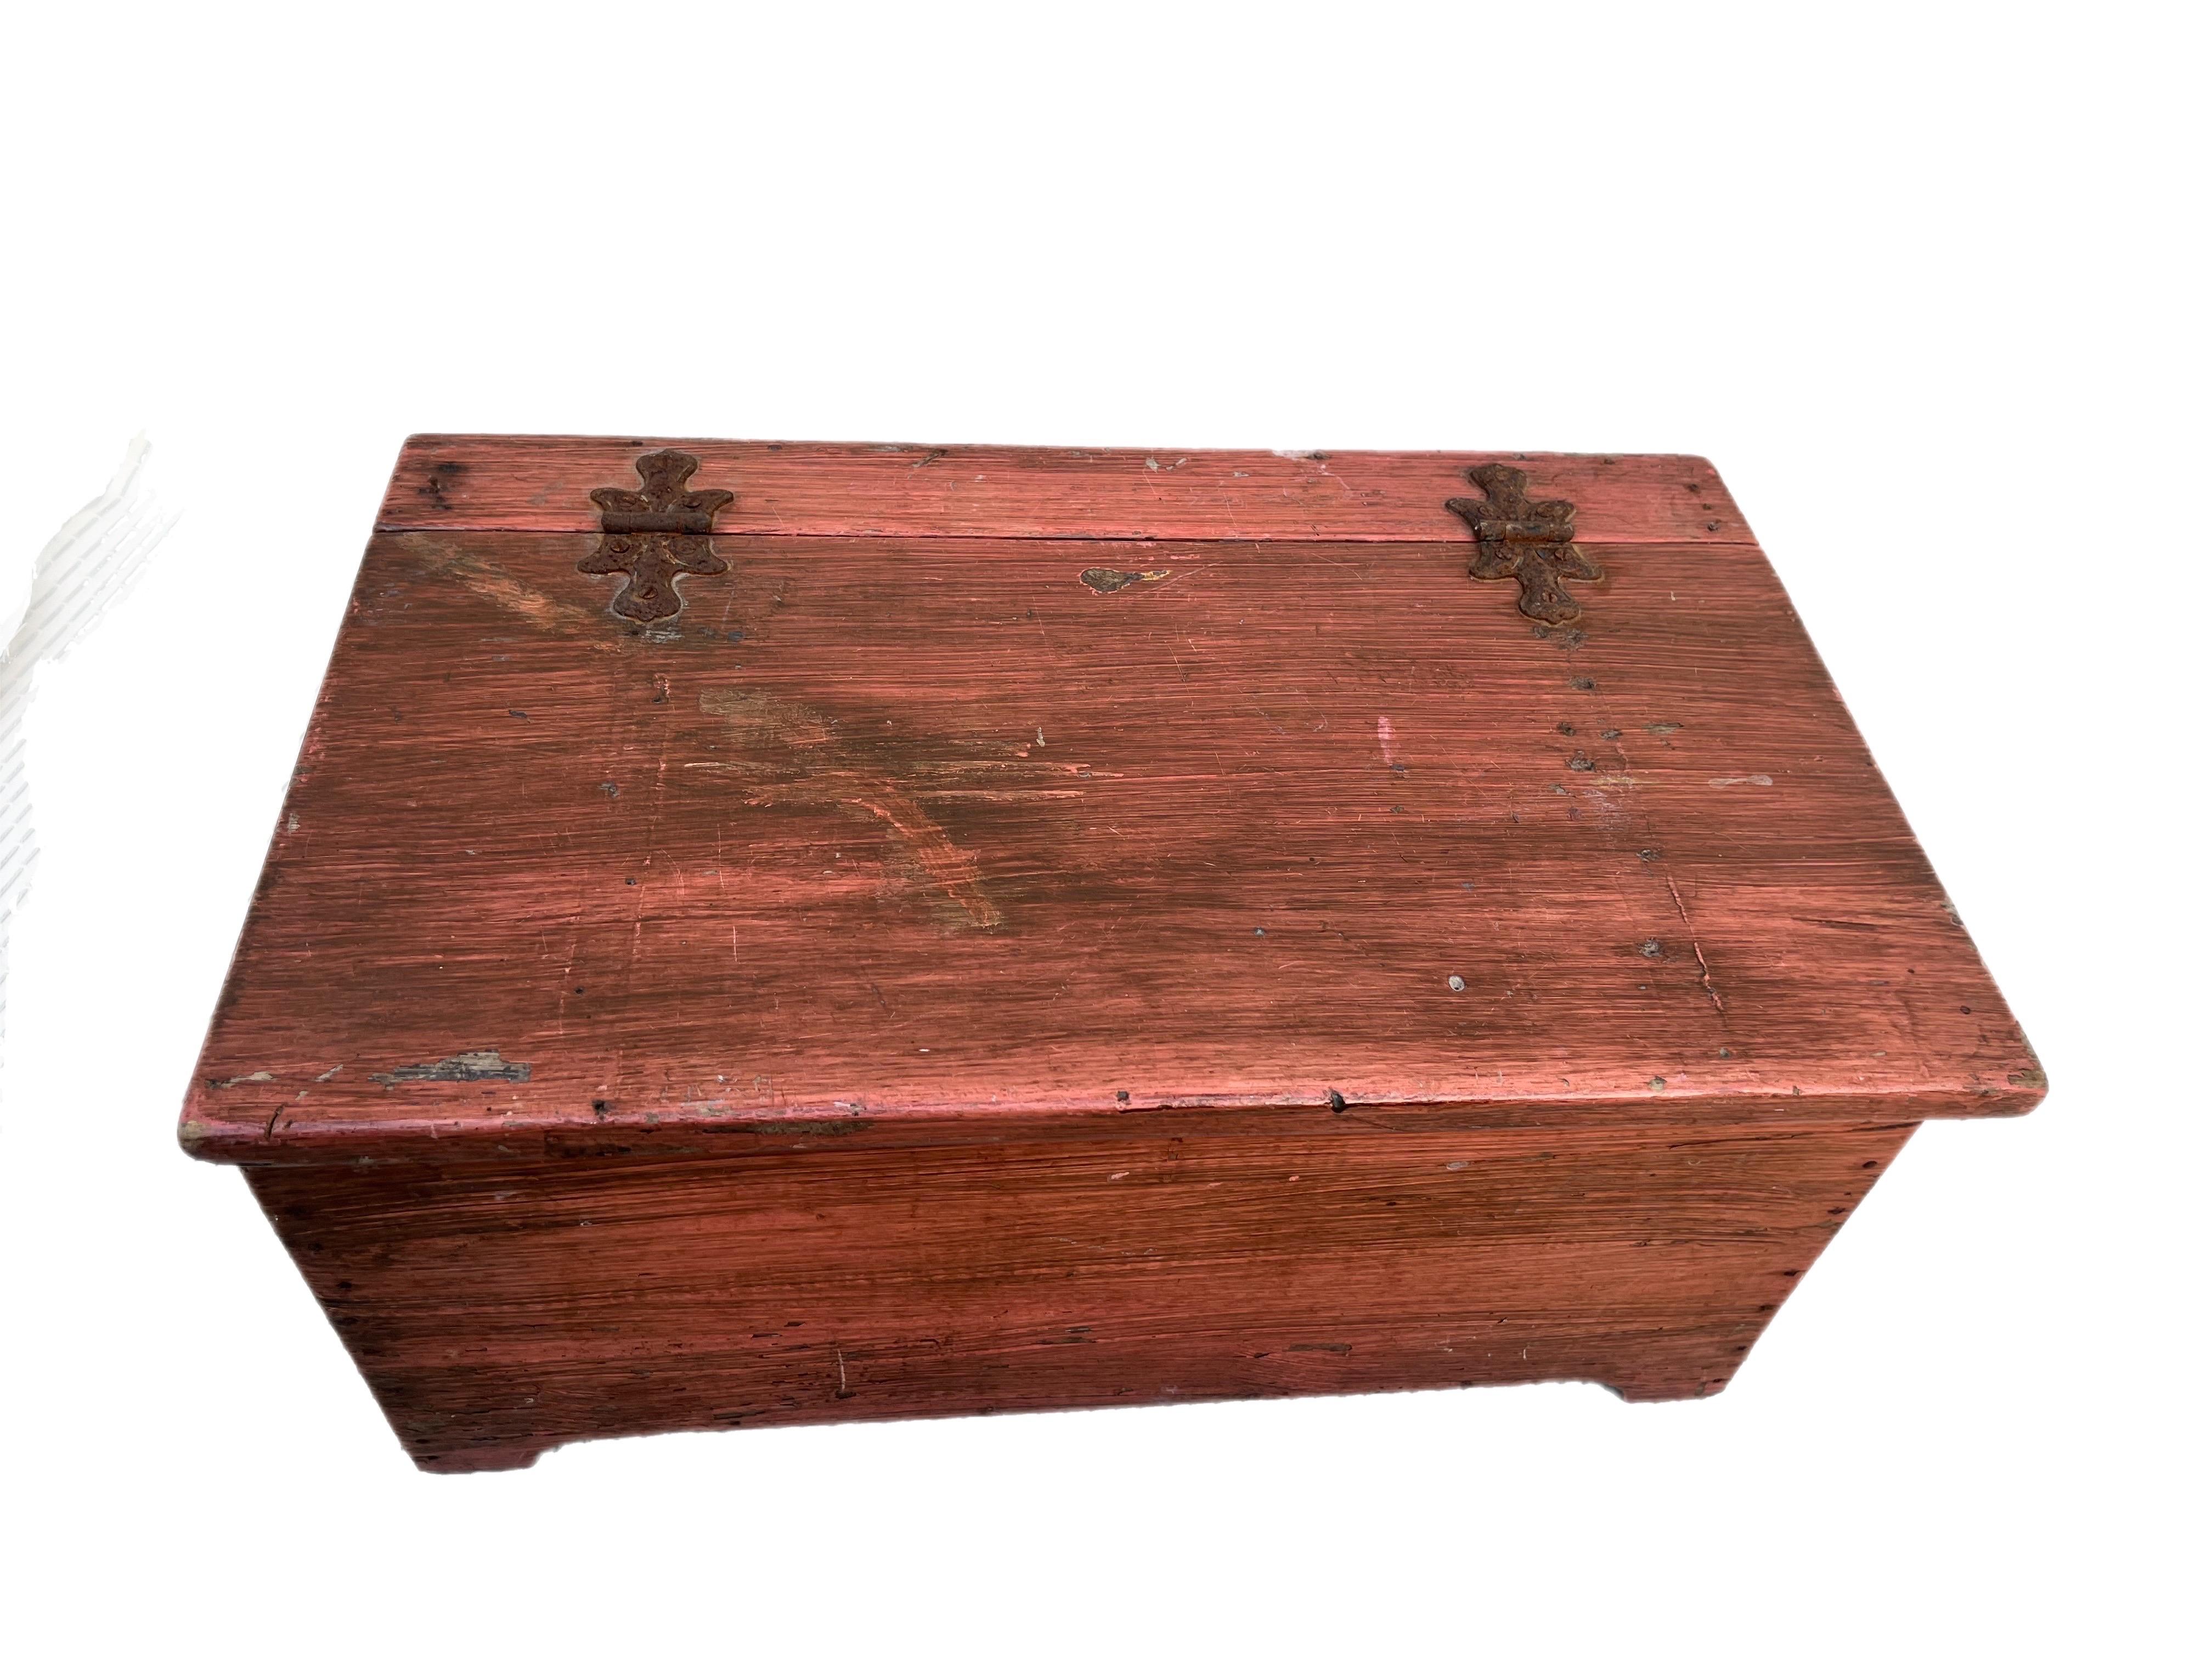 Antique 19th century primitive pine farmhouse blanket / hope chest or toy storage trunk. Made of pine featuring rectangular form painted red exterior, hand dovetailing, forged iron hinges and one interior compartment.